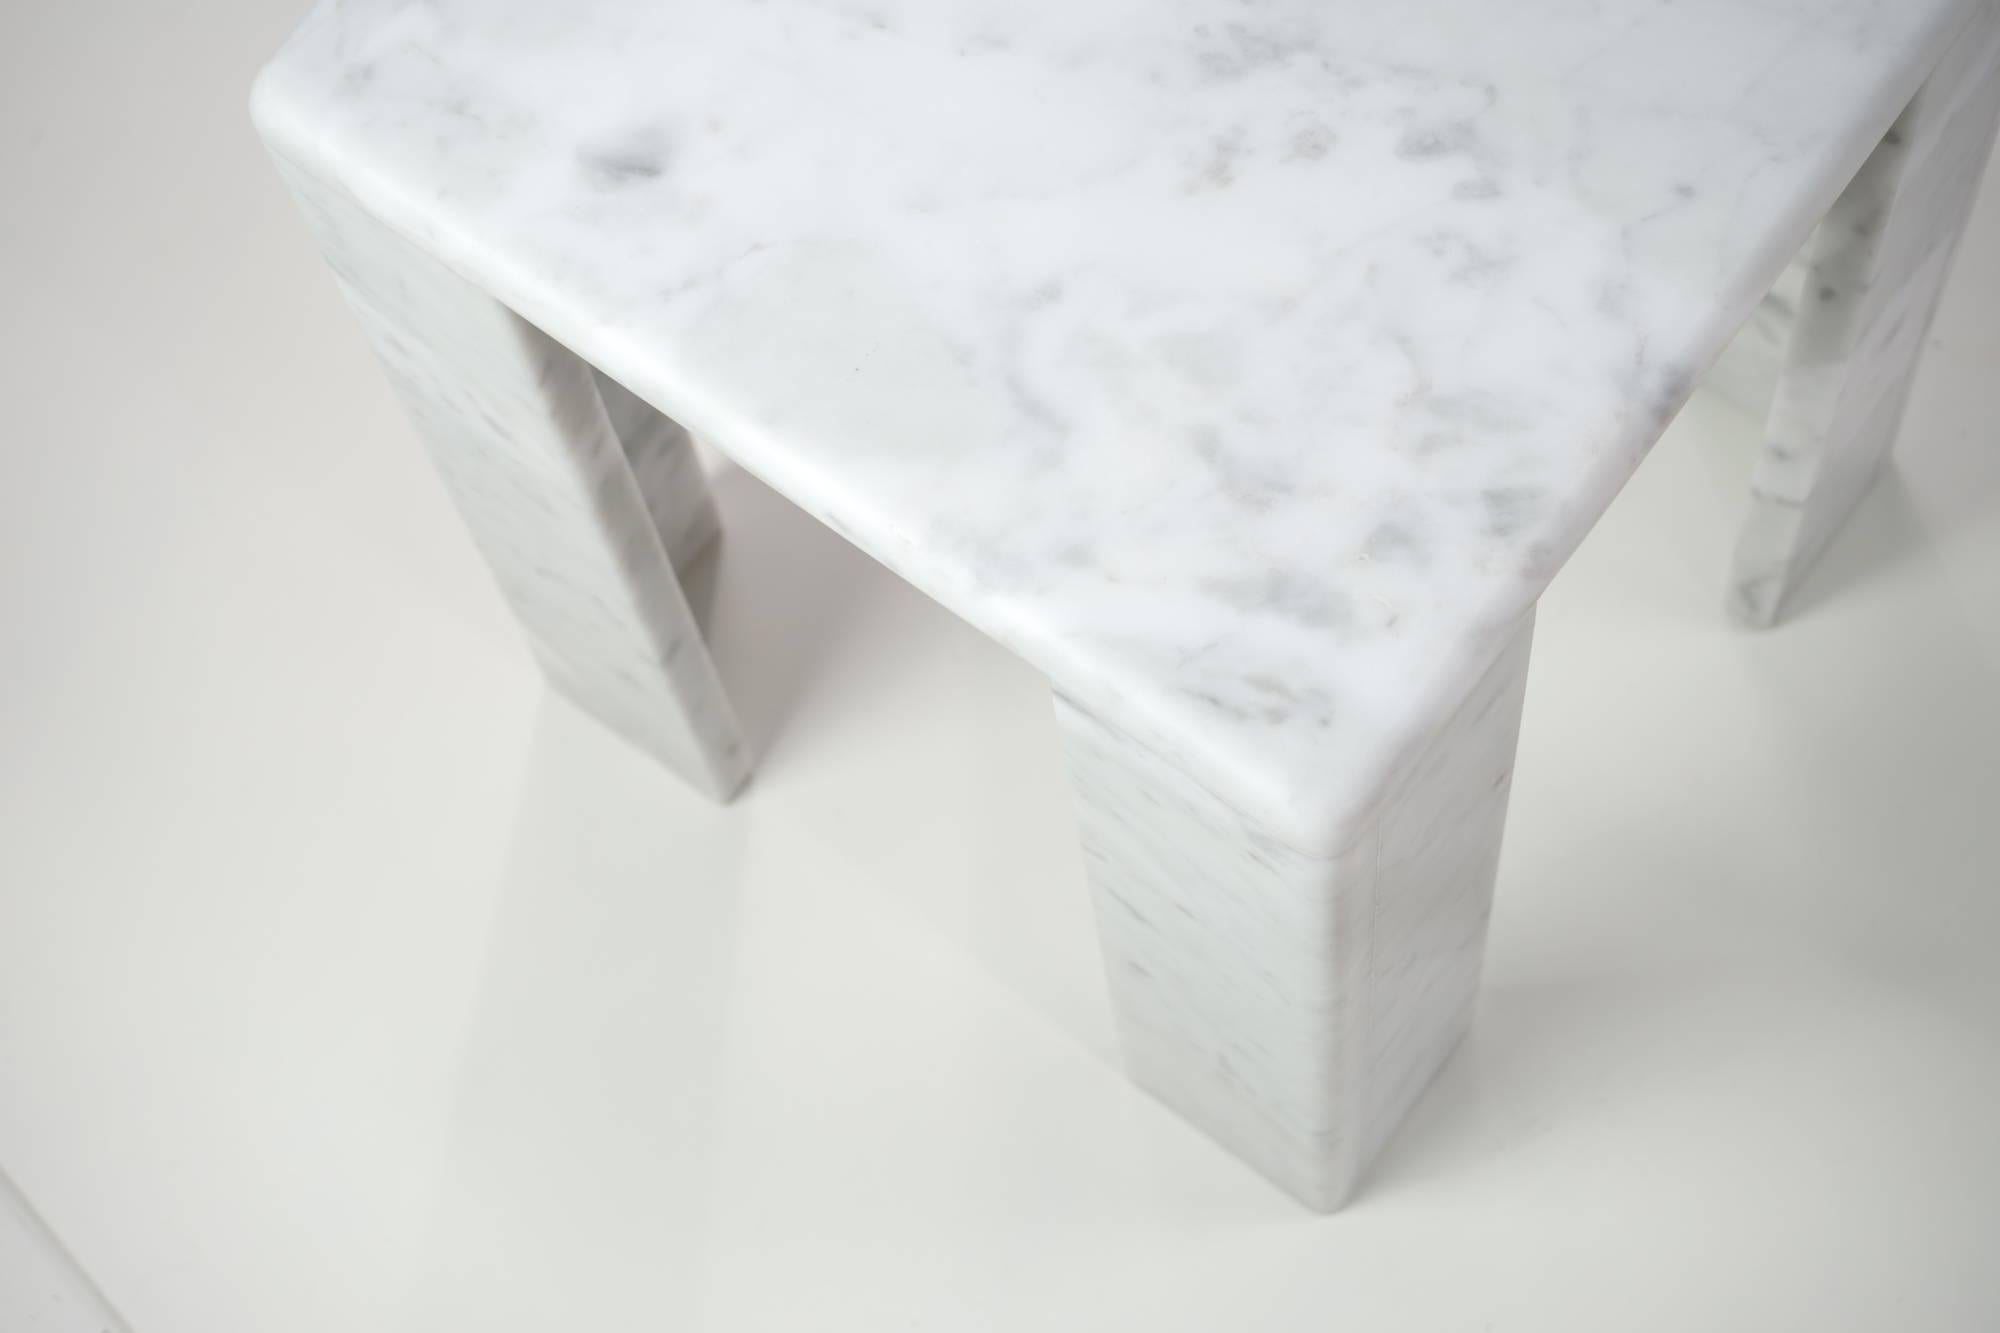 Avior is an evolution of the Gravity side table. We decided to keep the same concept of lightness and movement, abstracting the motion of the flying Carrara marble into a different 3D iron structure. 

The geometry was achieved through playful